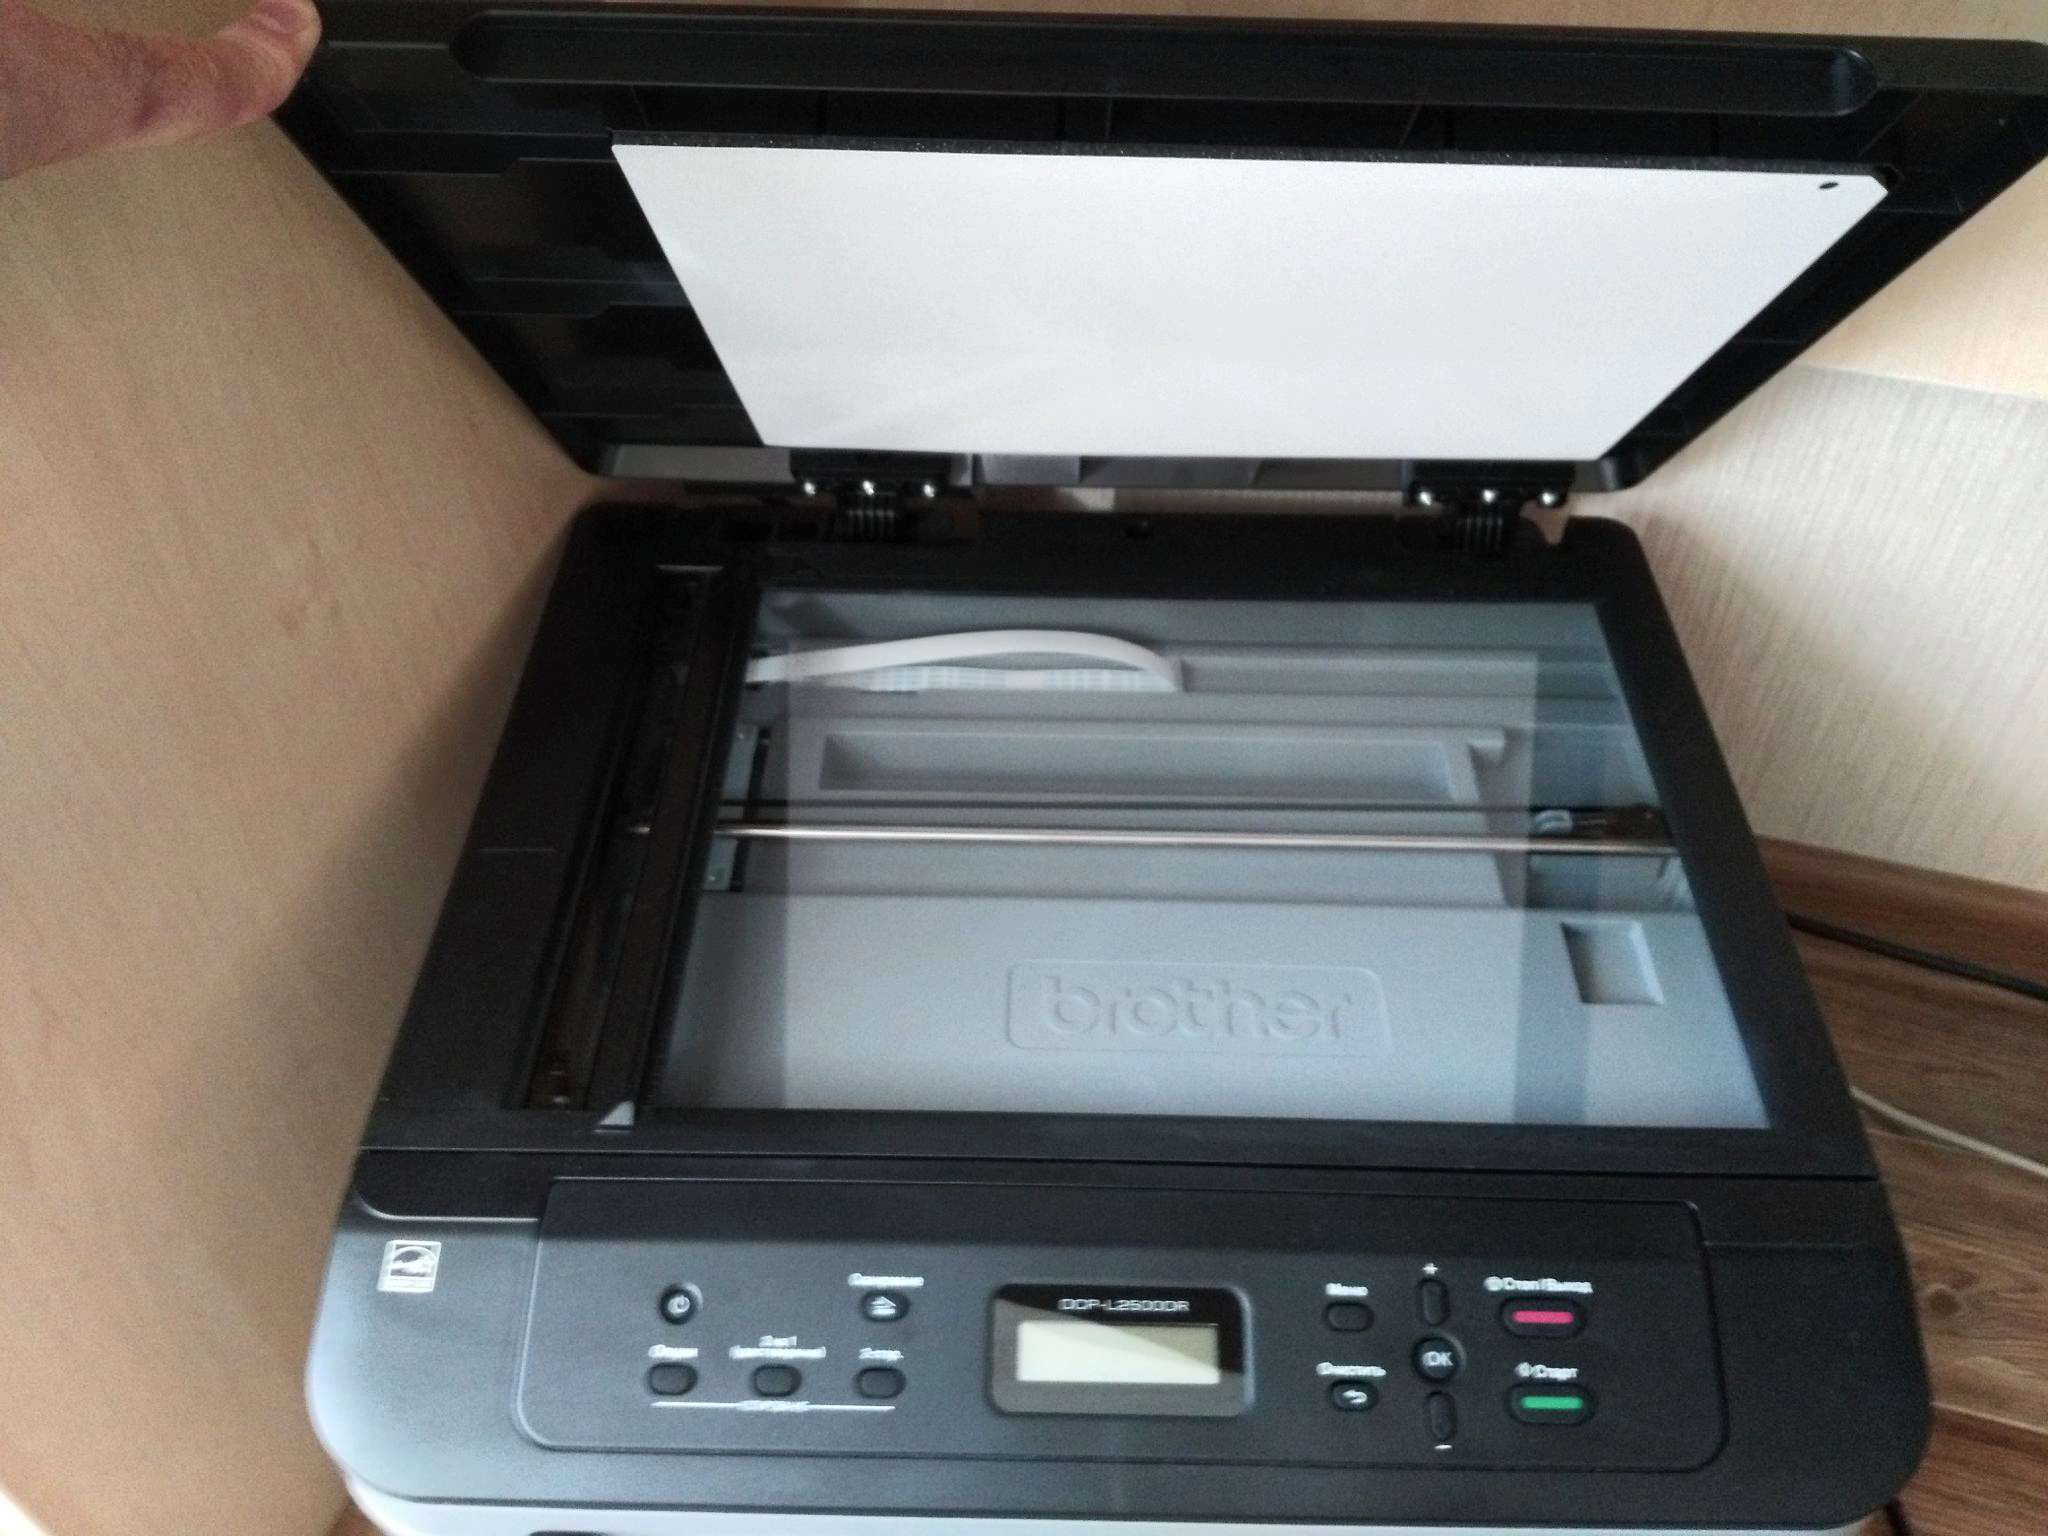 Brother dcp 2500dr. МФУ DCP l2500. Brother DCP-l2500. Brother DCP 2500. Принтер brother l2500dr.